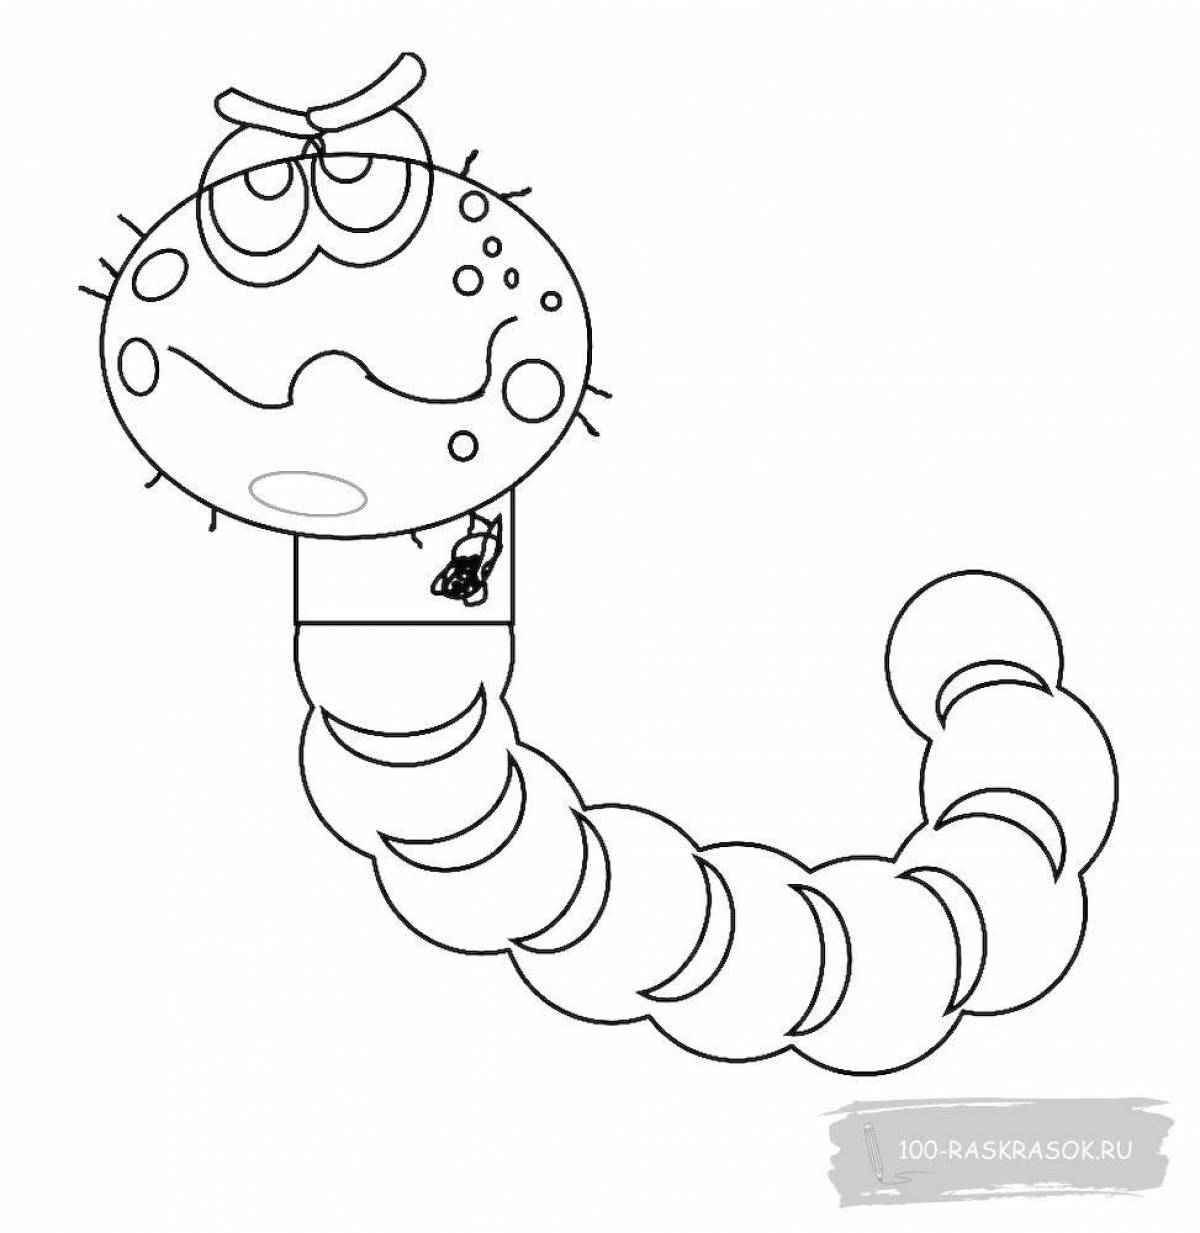 Worm for kids #9